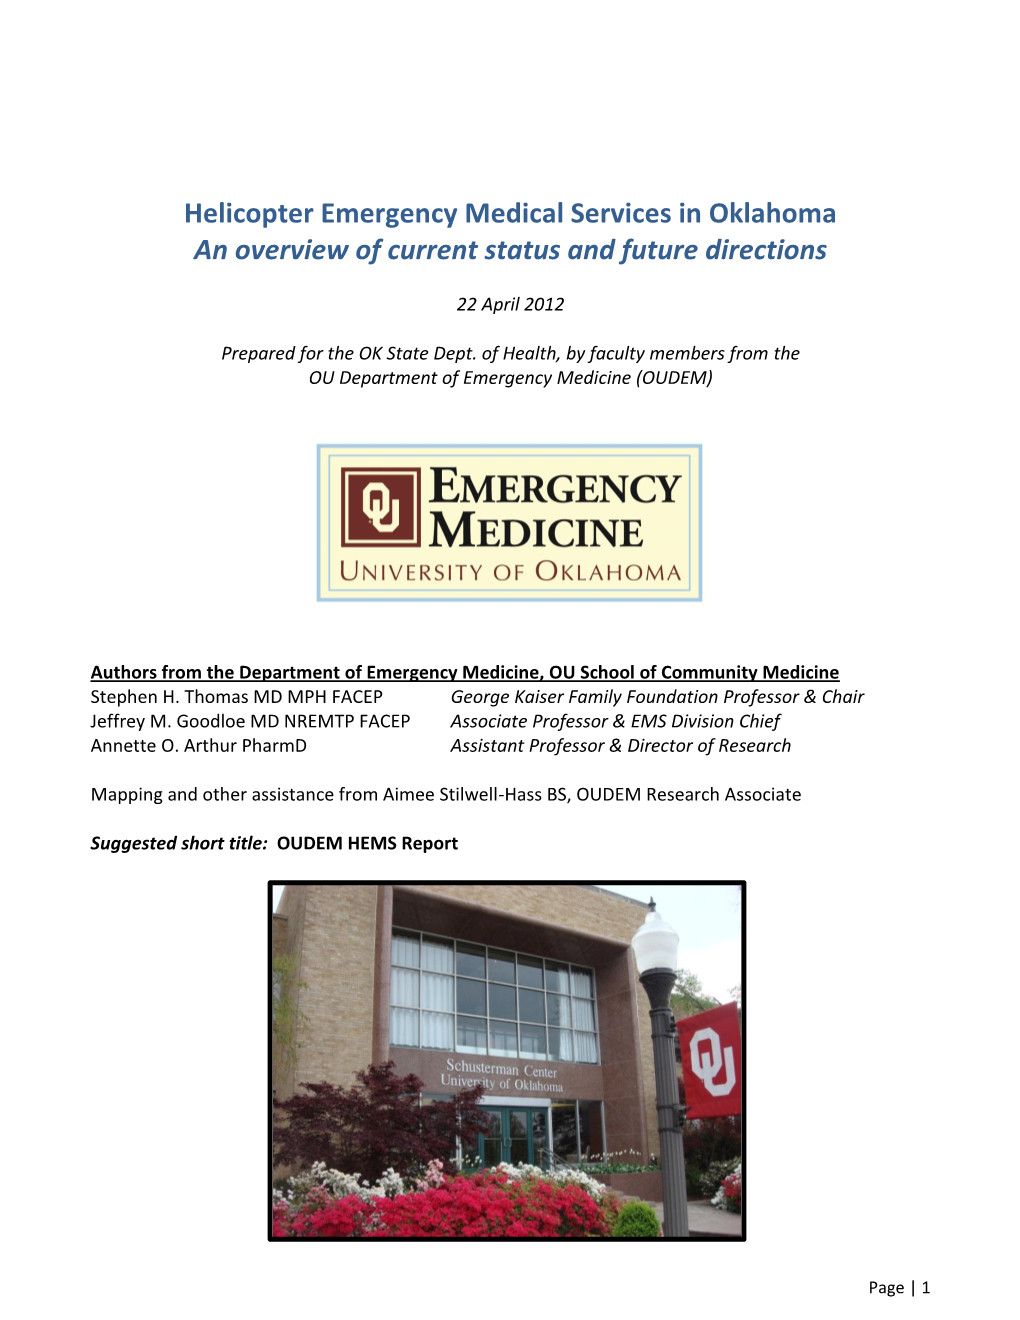 Helicopter Emergency Medical Services in Oklahoma an Overview of Current Status and Future Directions